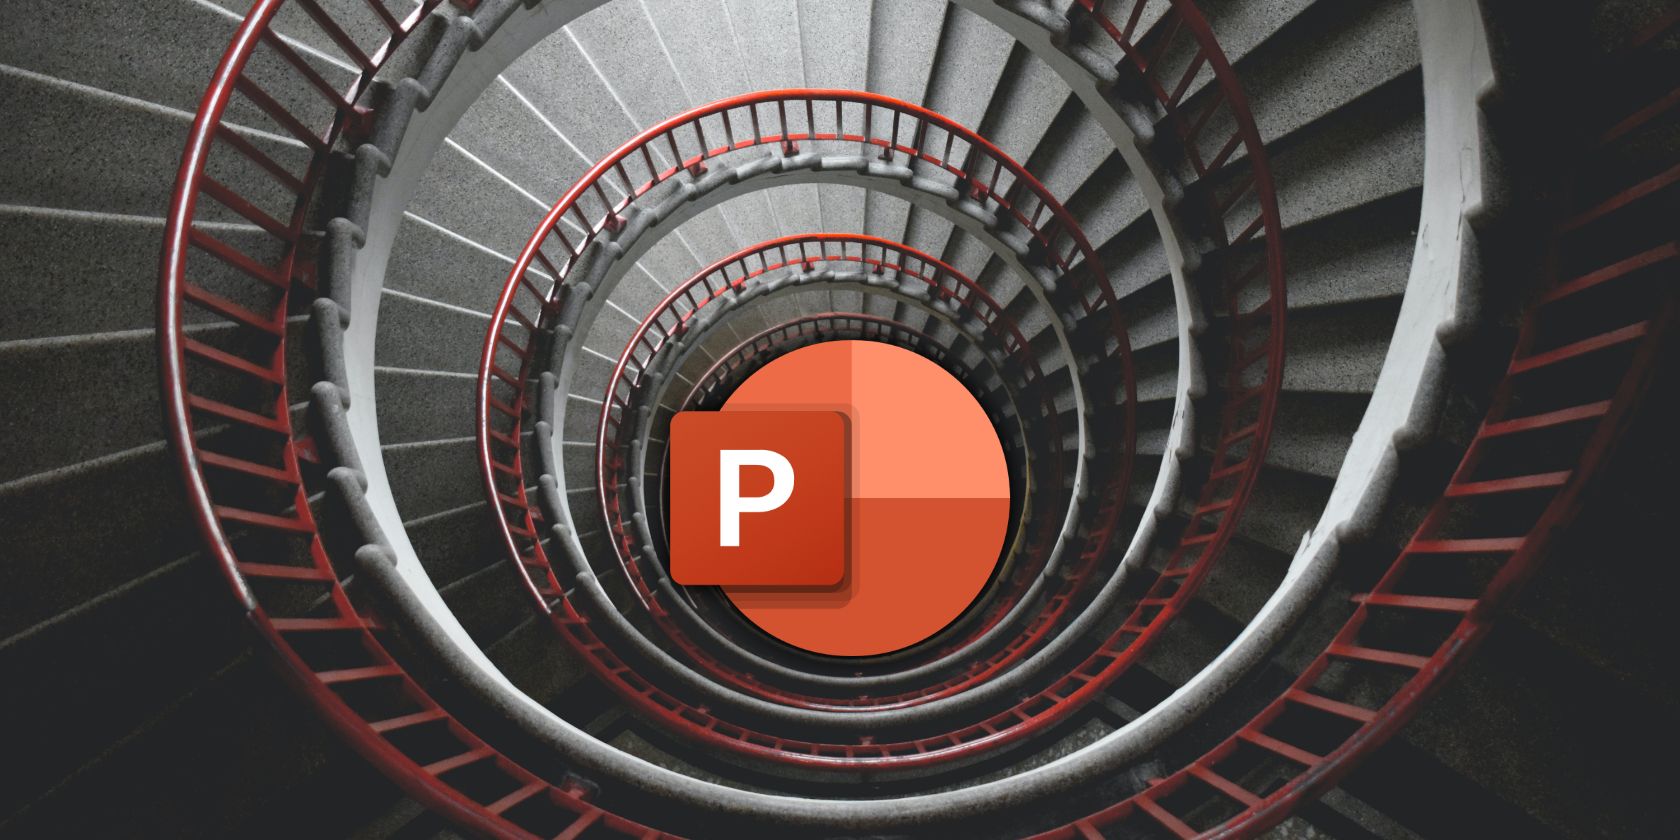 An illustrative image of the PowerPoint logo inside a spiraling staircase.